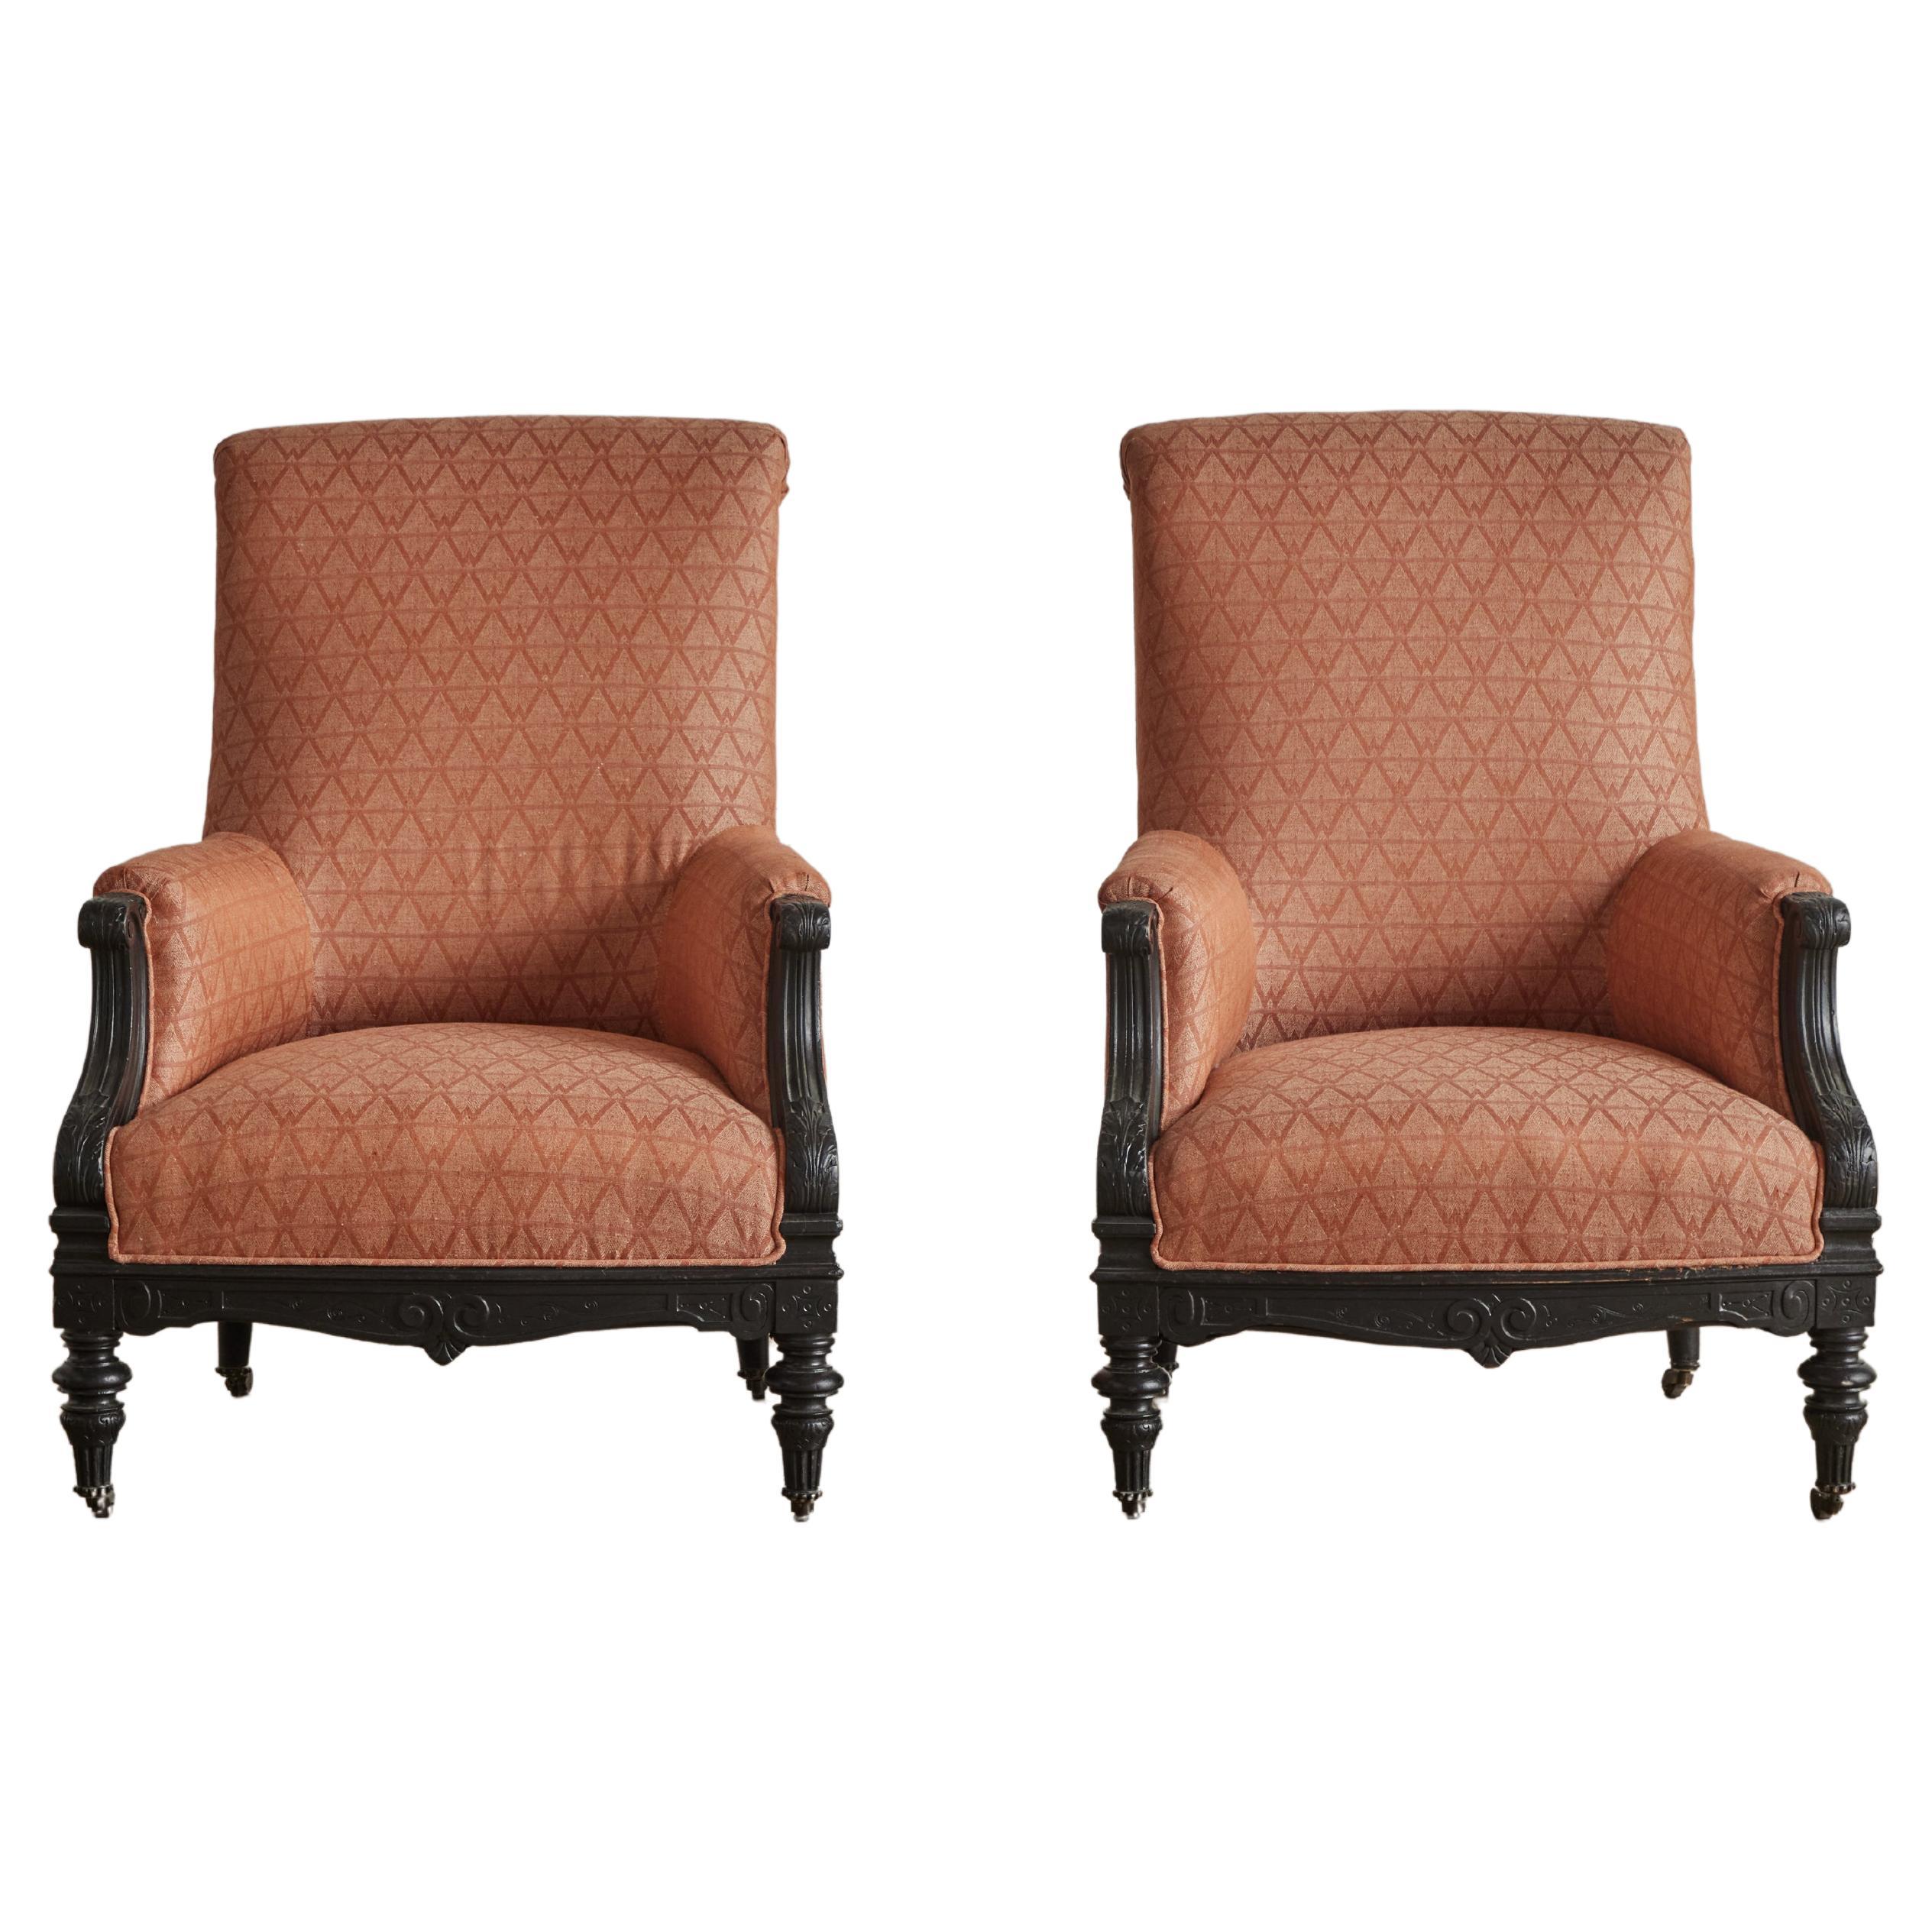 Pair of 19th Century Arm Chairs